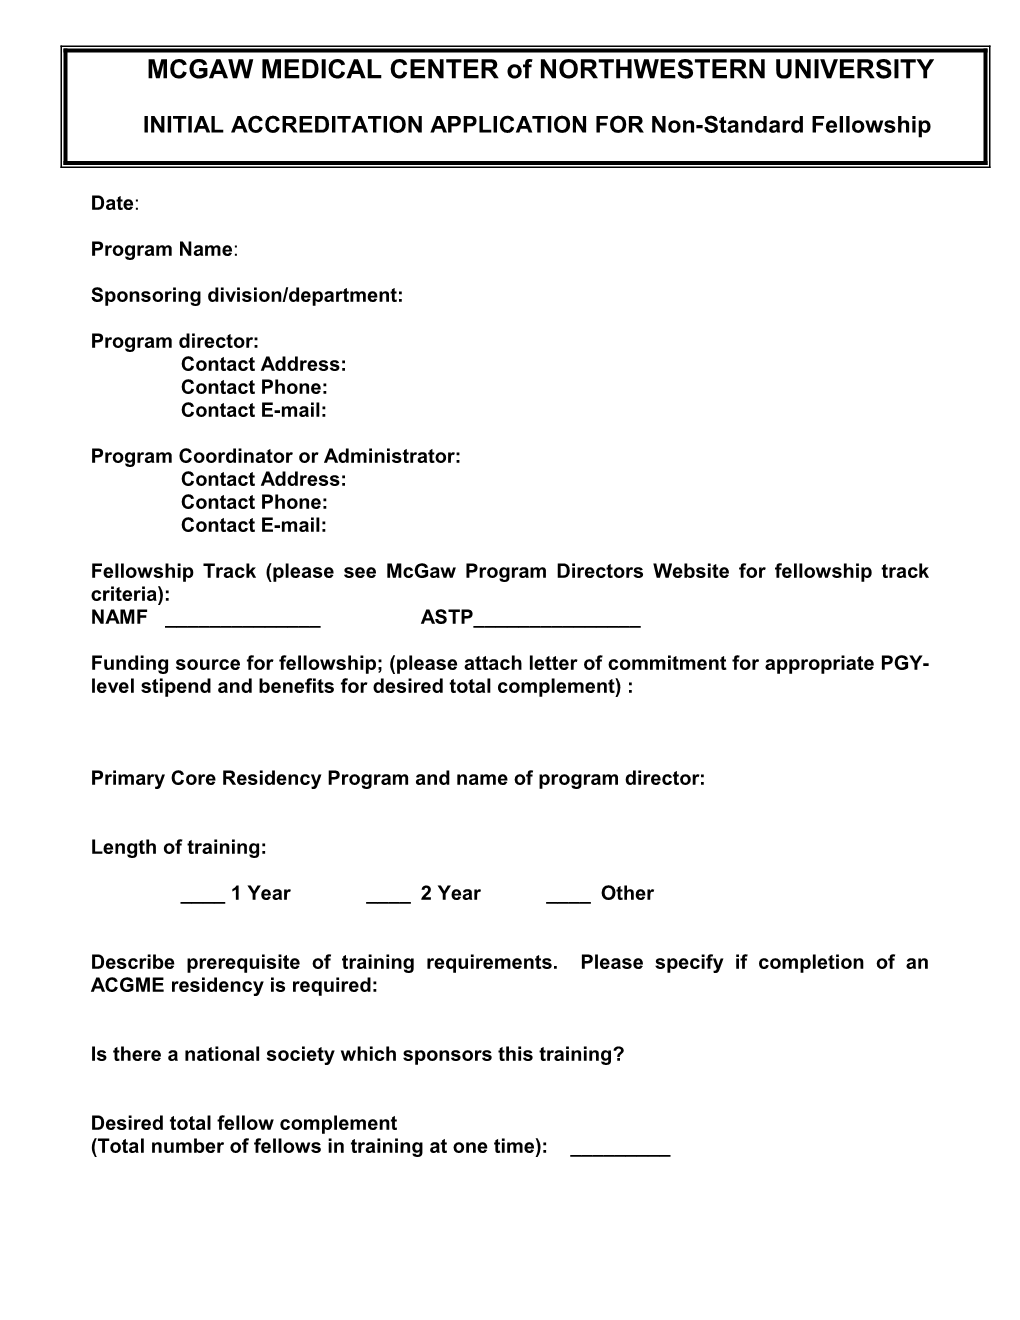 Application for Non-Acgme Approved Fellowship